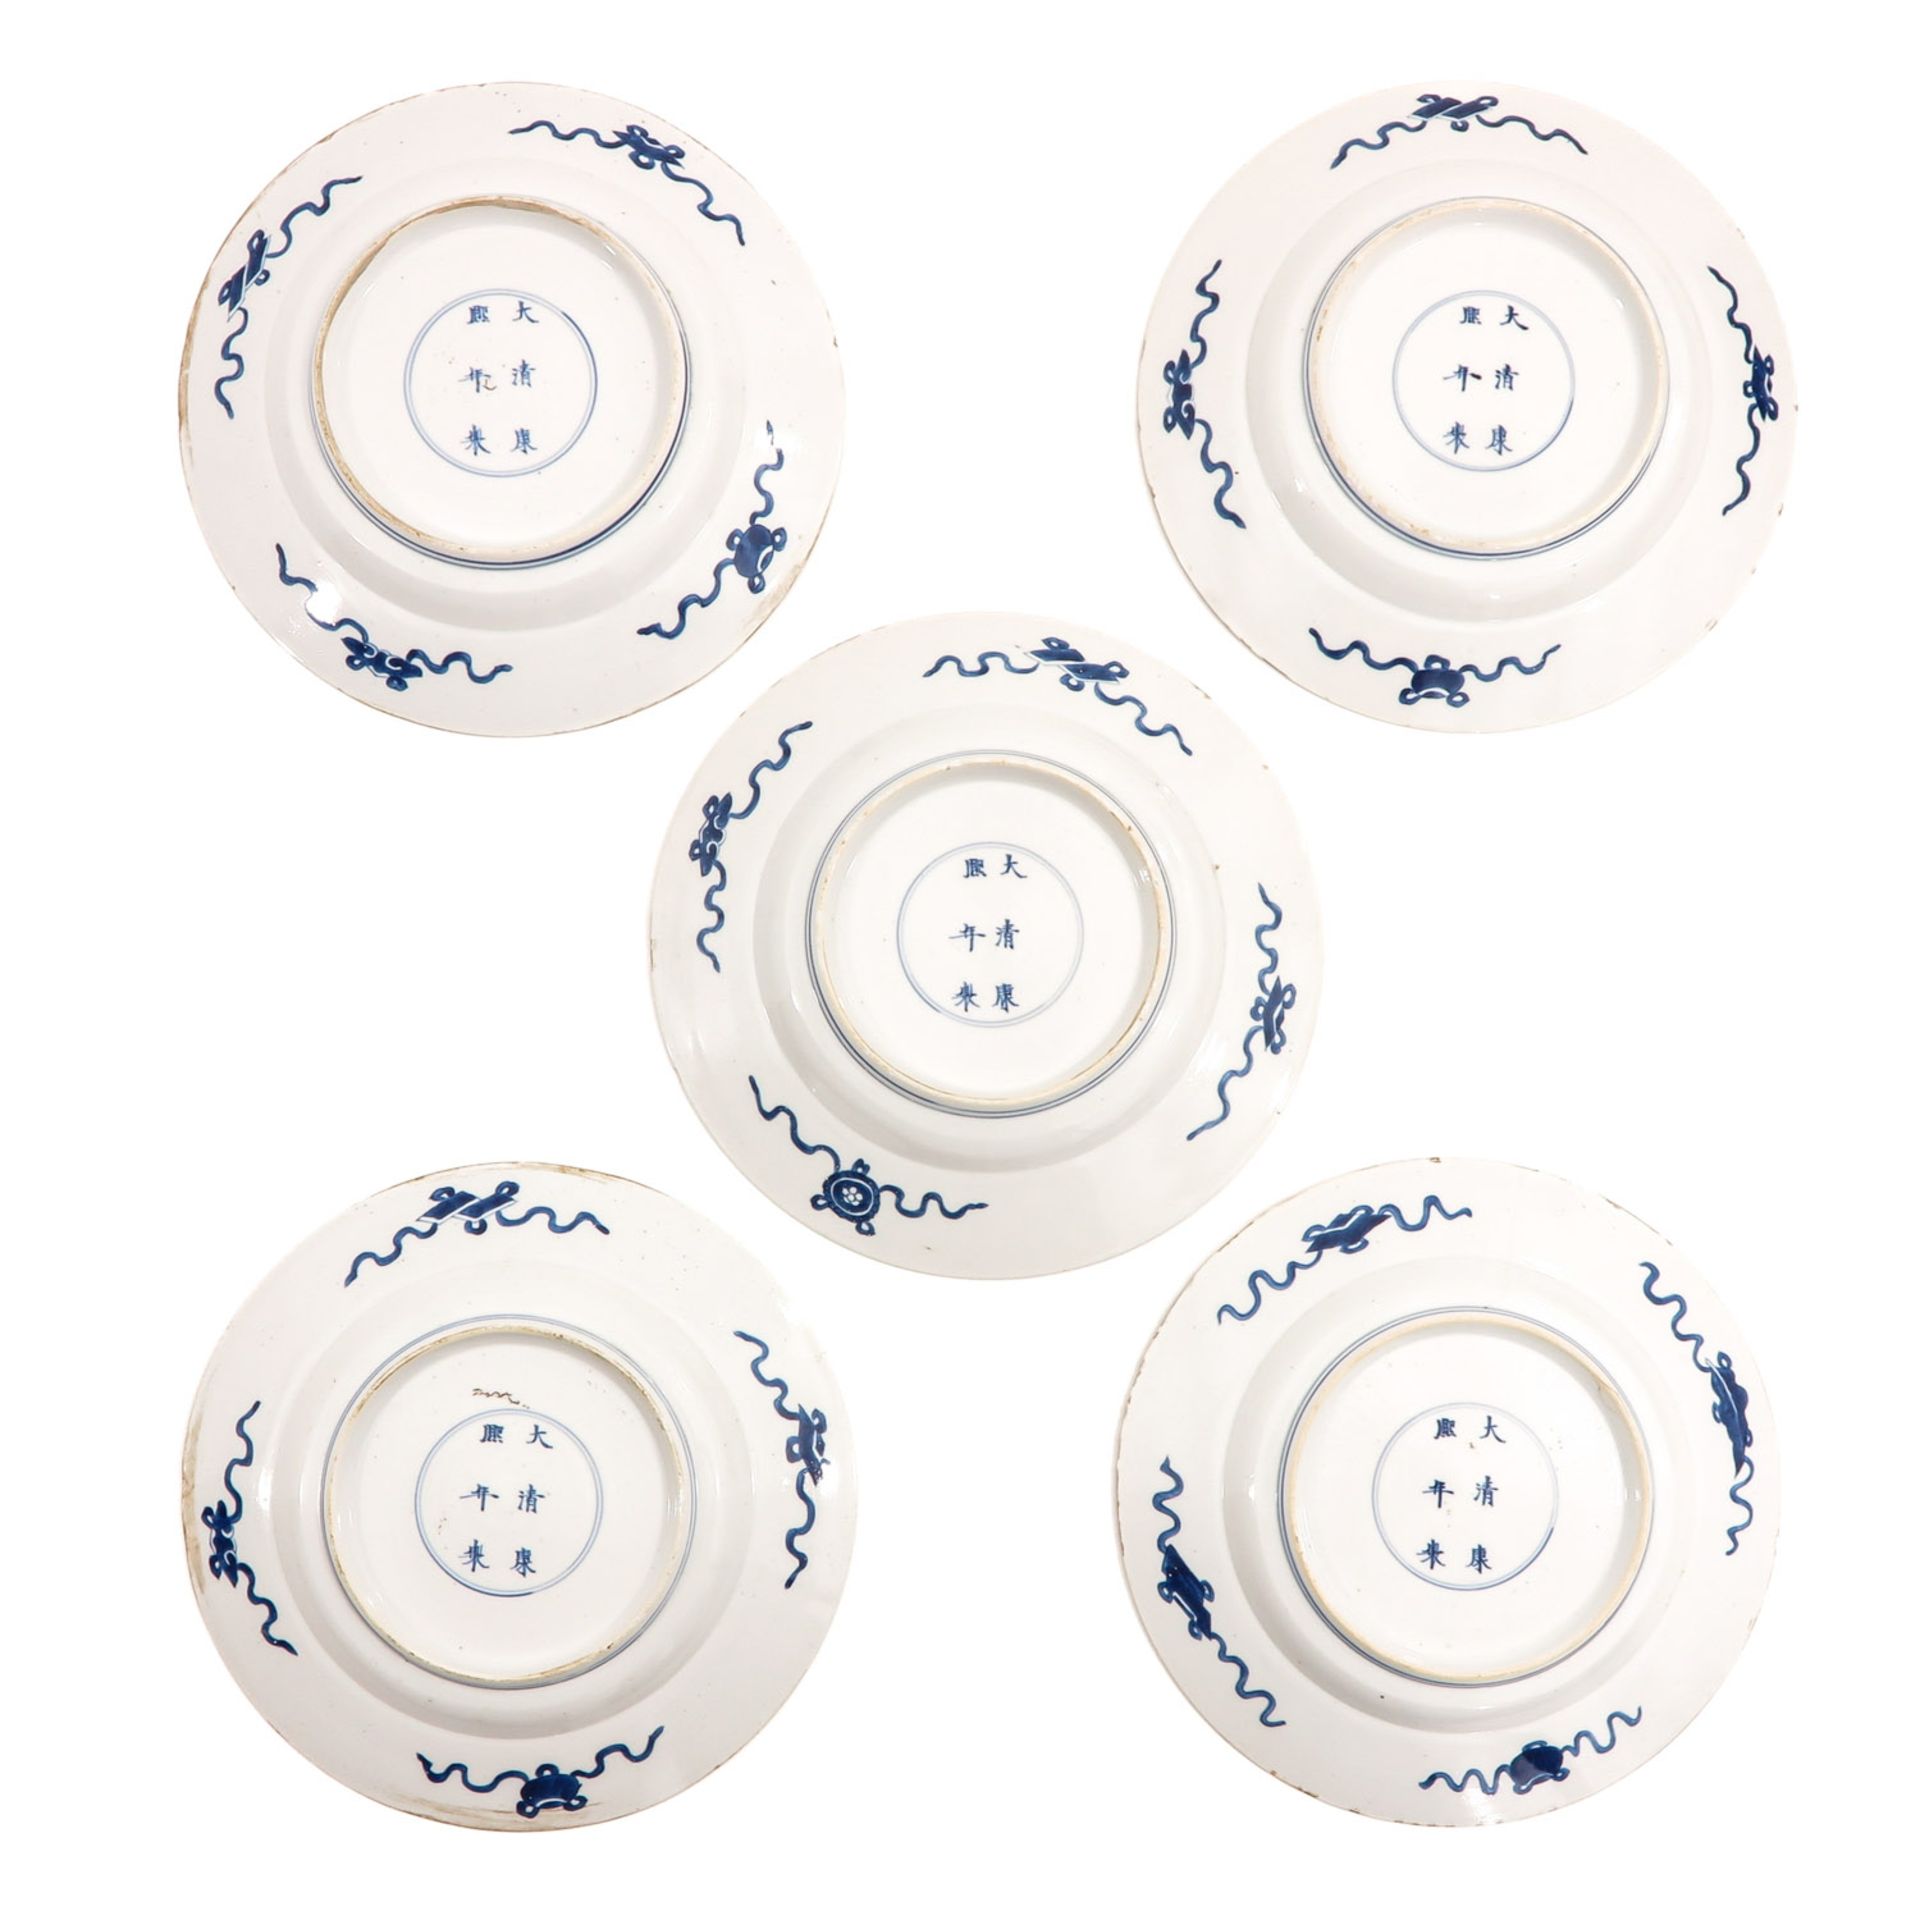 A Series of 5 Blue and White Plates - Image 2 of 10